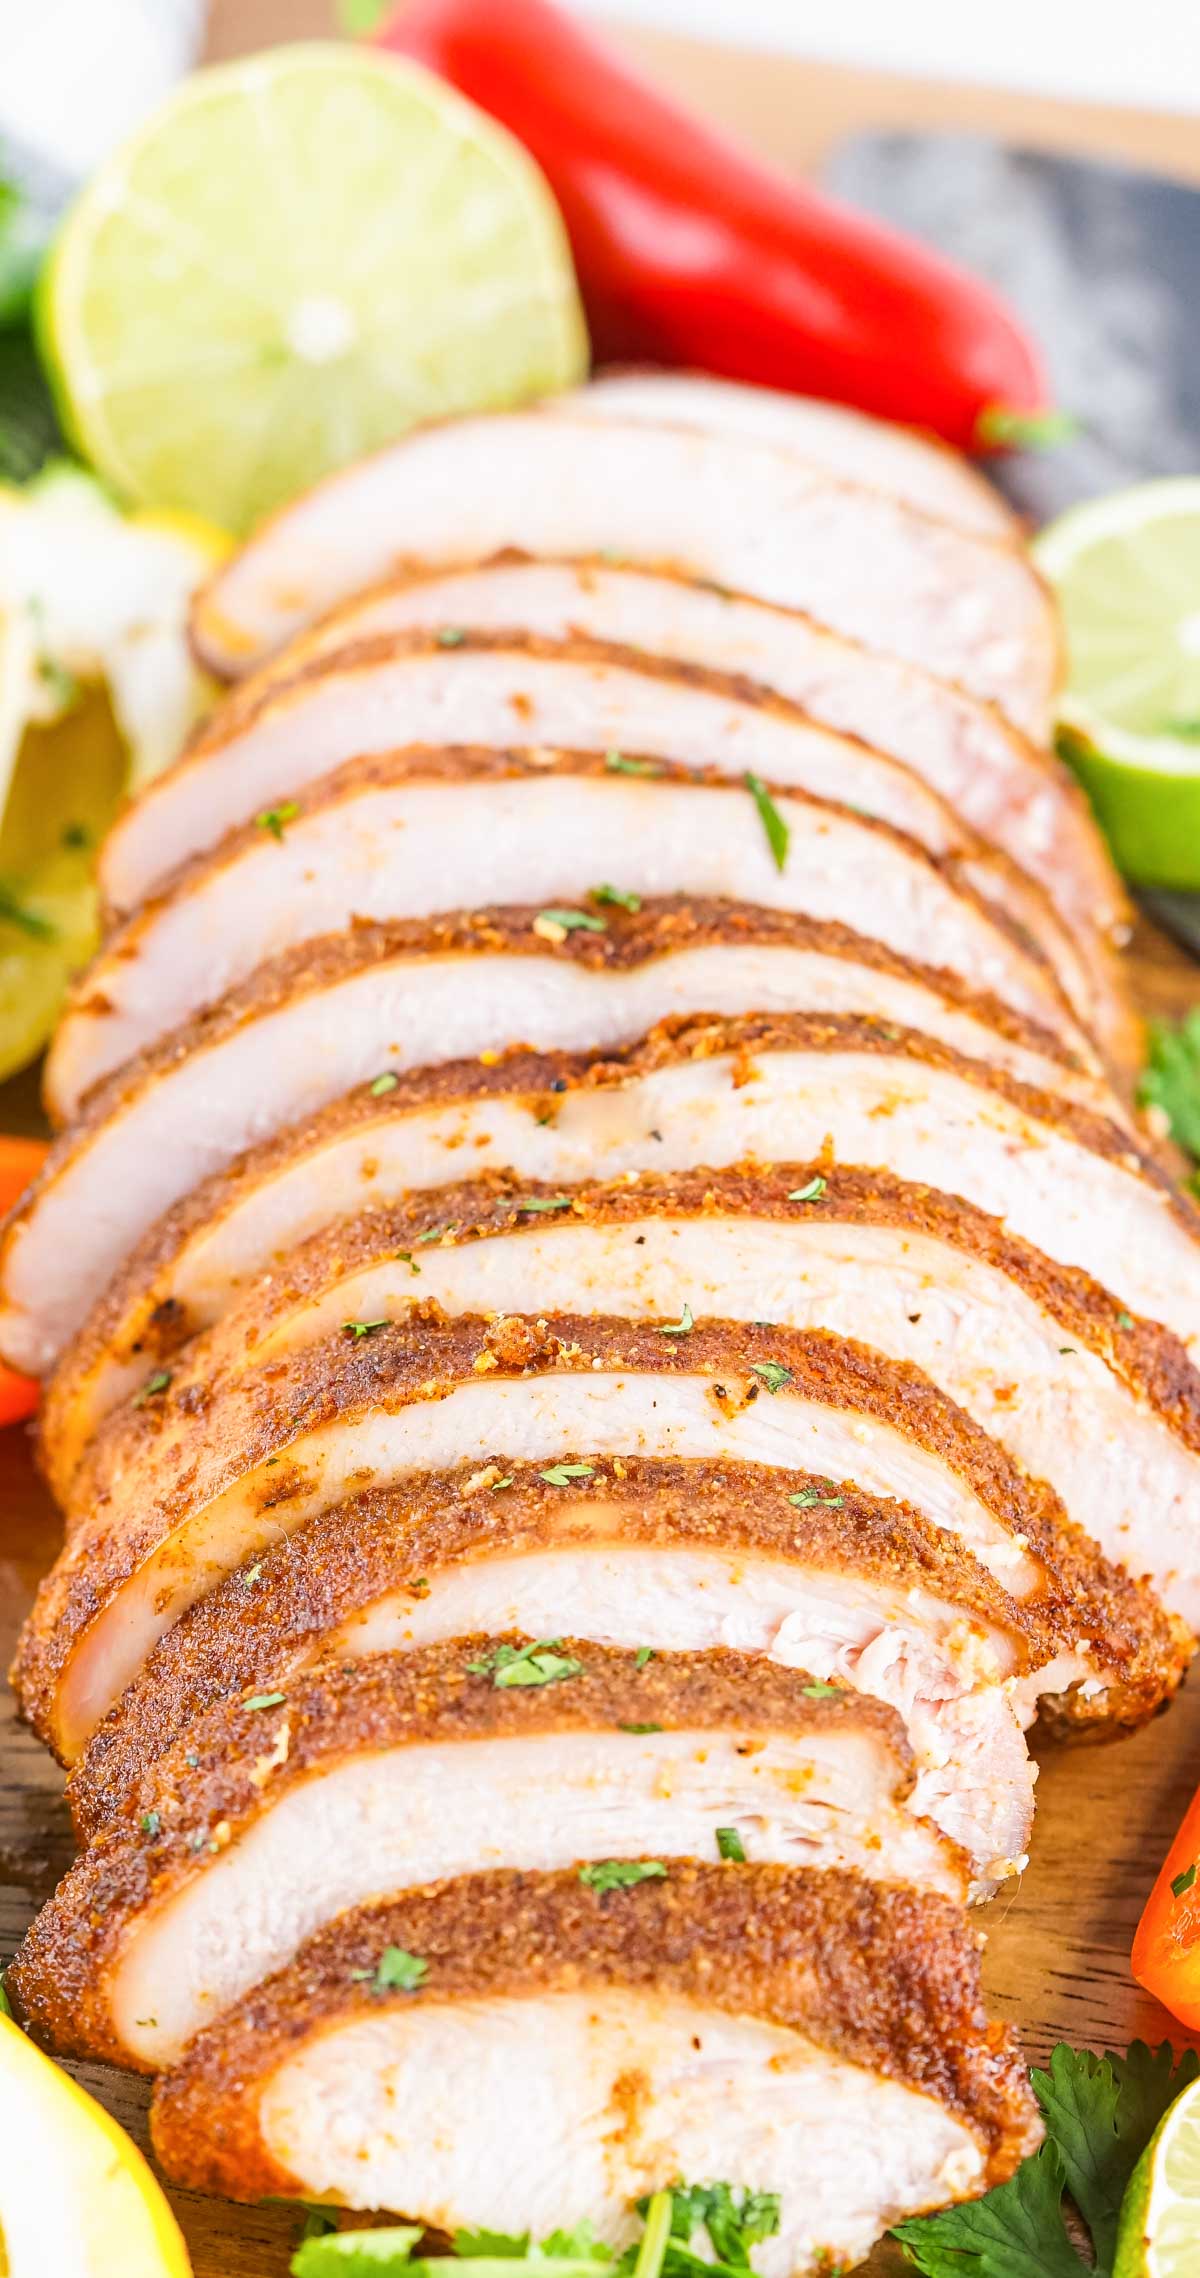 Sliced turkey breast that has been smoked with garnishes.